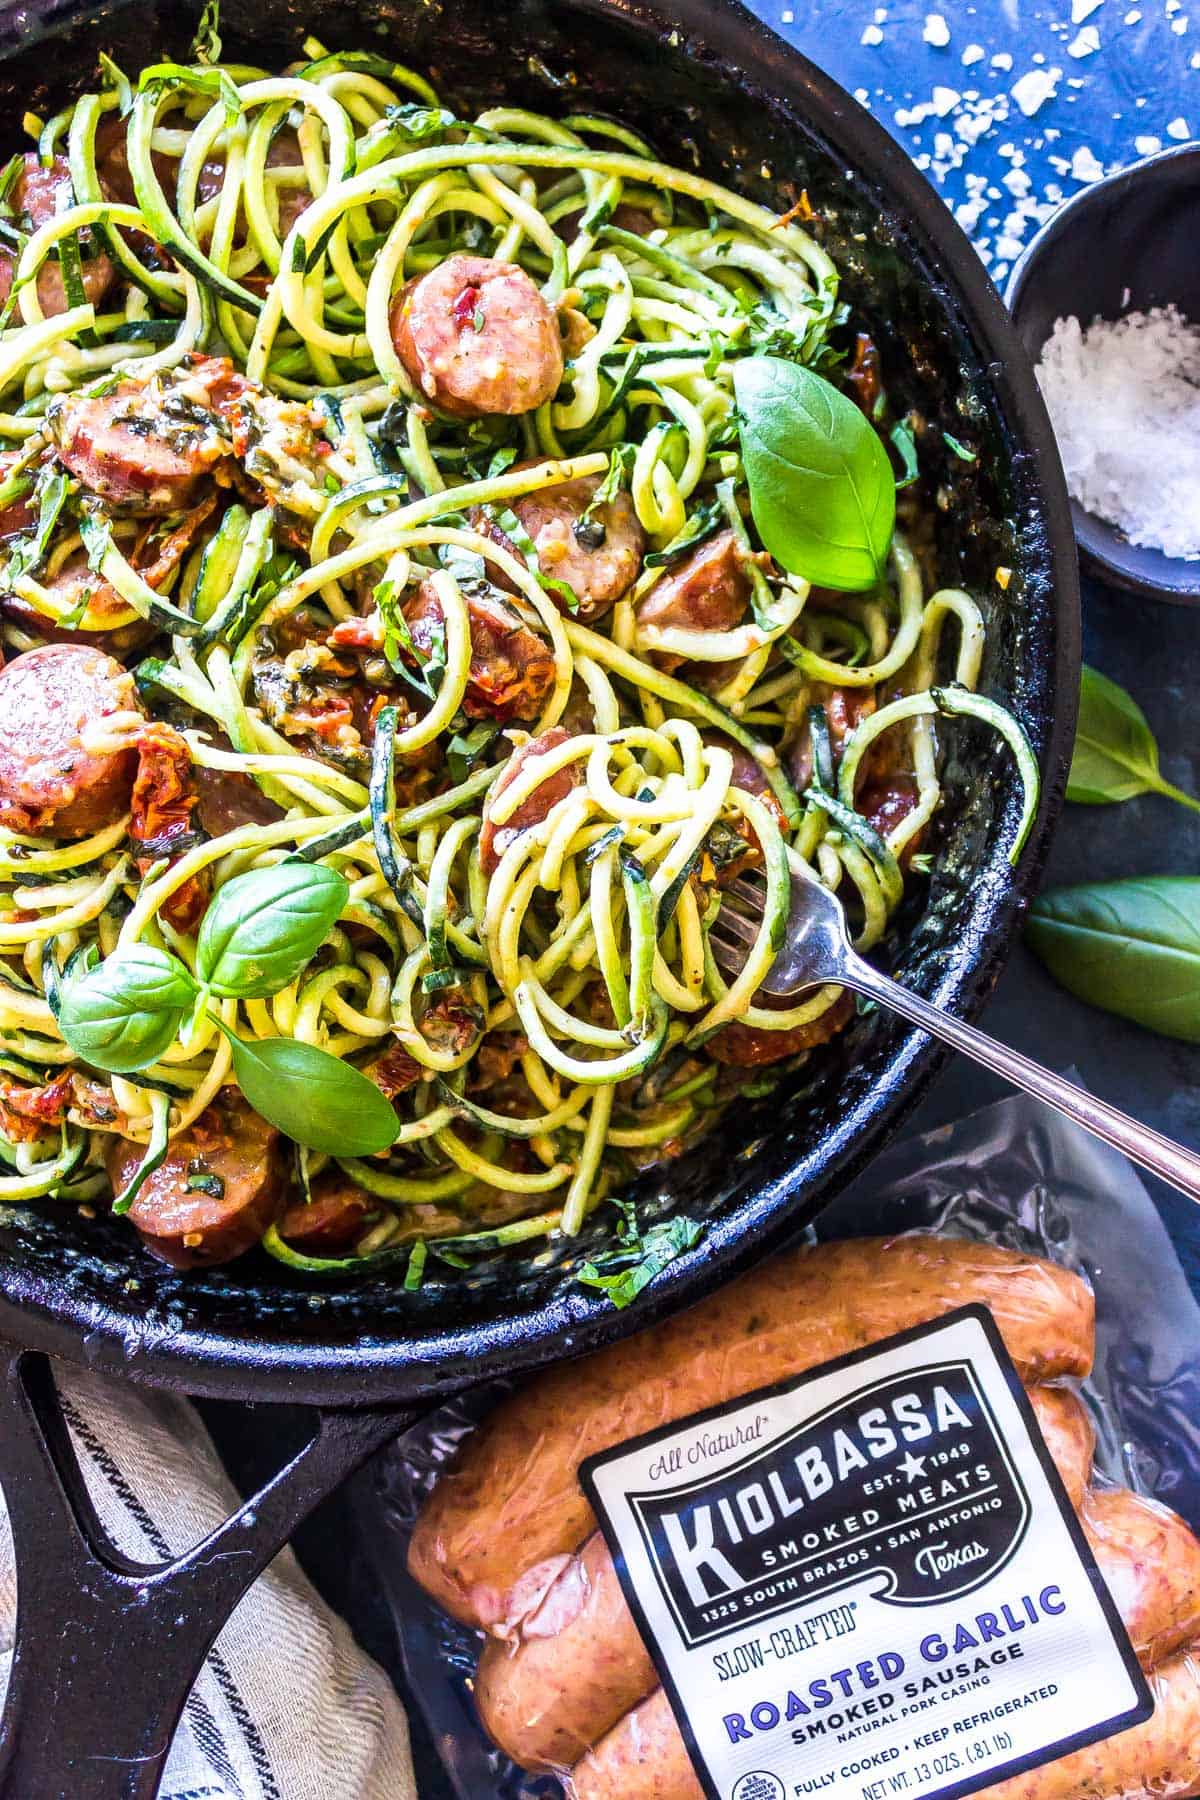 Creamy Tuscan Zoodles with Sausage with kiolbassa packaging in the foreground